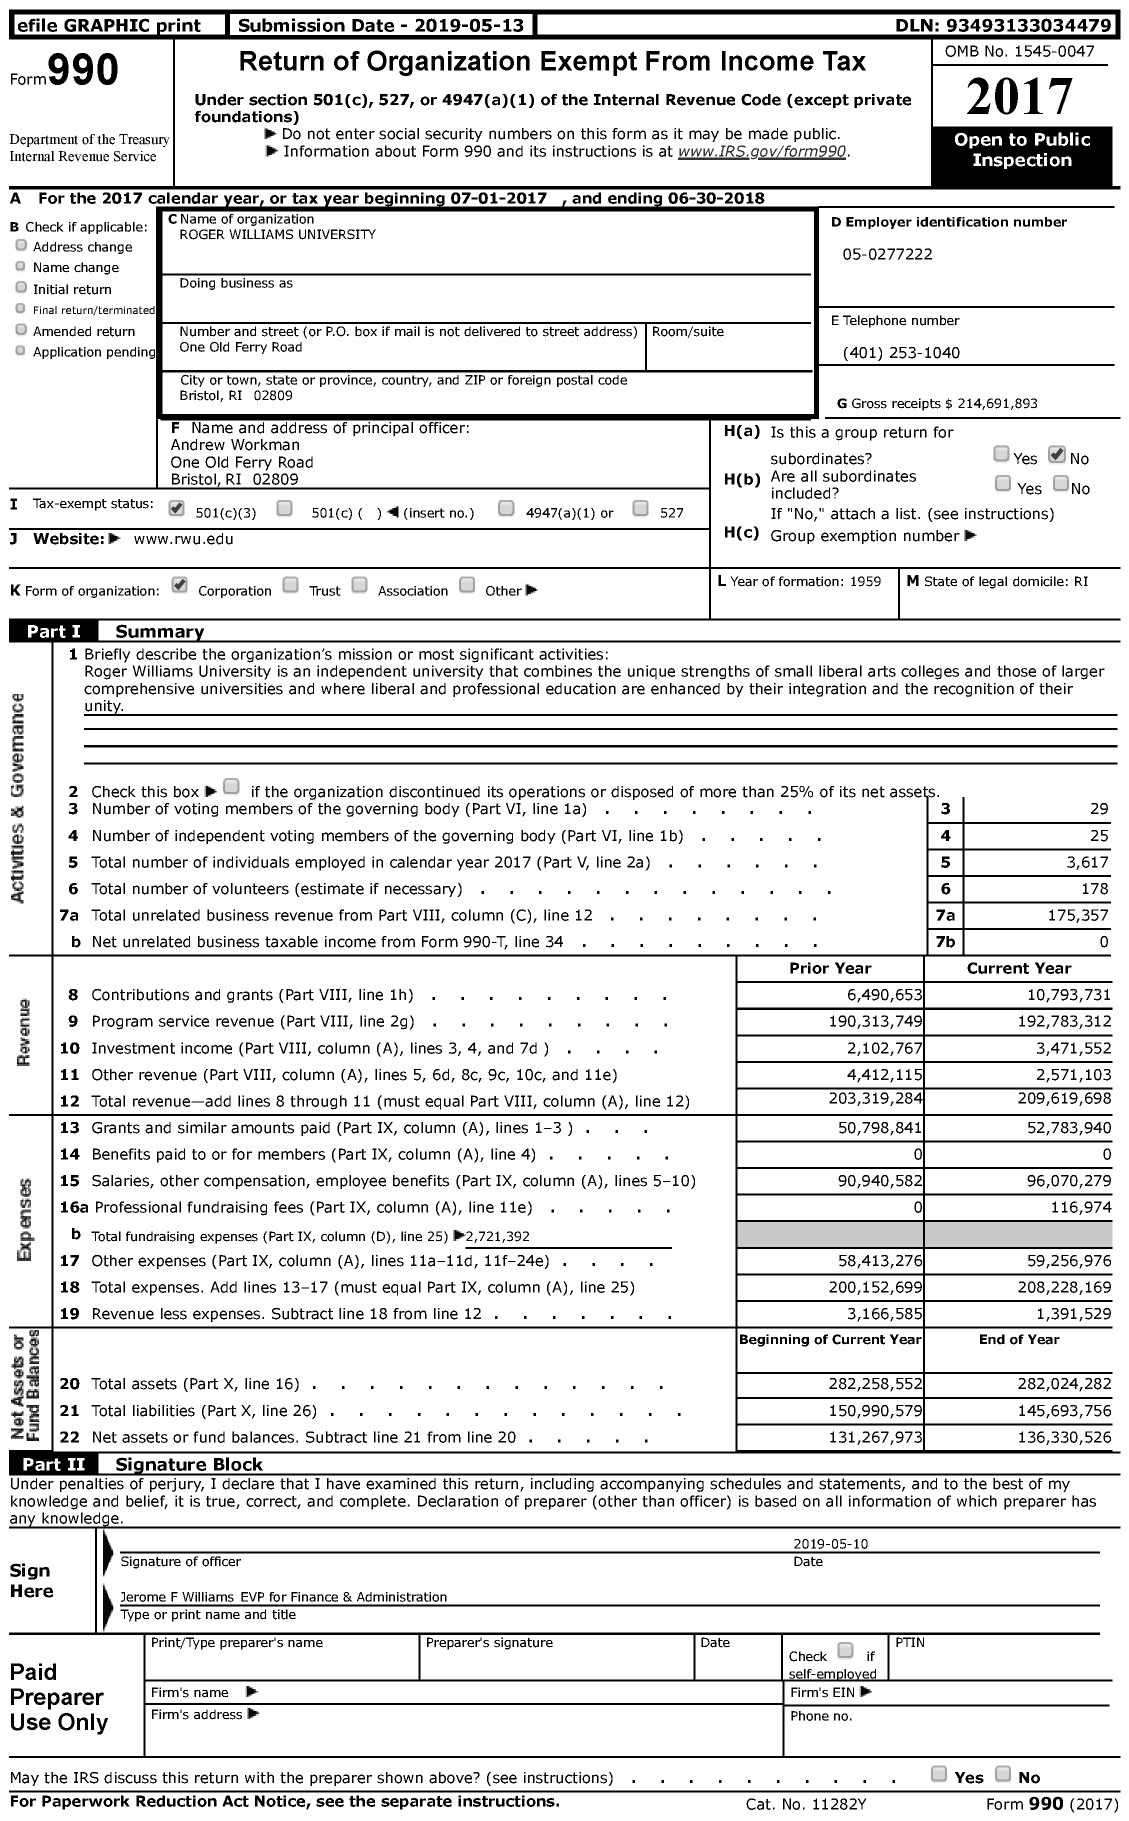 Image of first page of 2017 Form 990 for Roger Williams University (RWU)